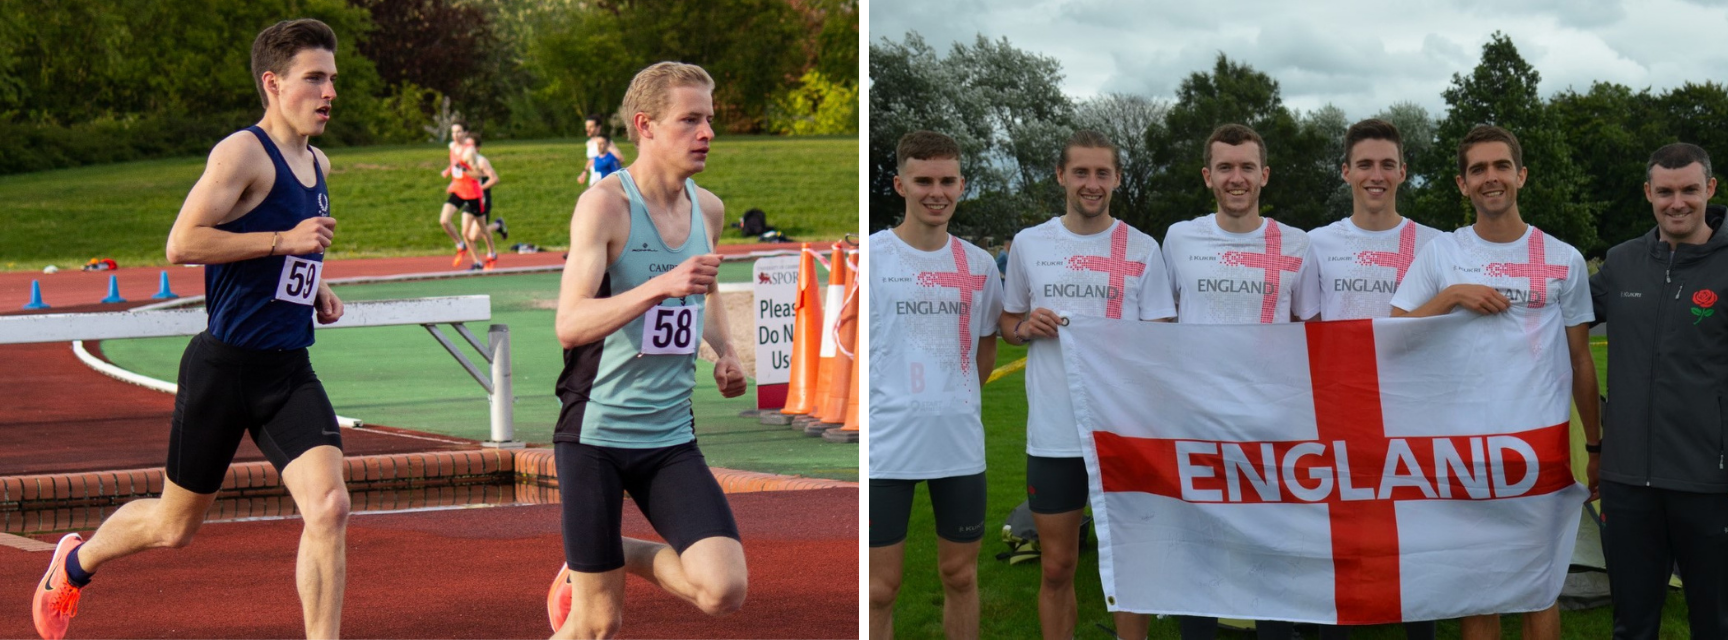 Two picture of Miles running in competitions, one for Oxford and one for England